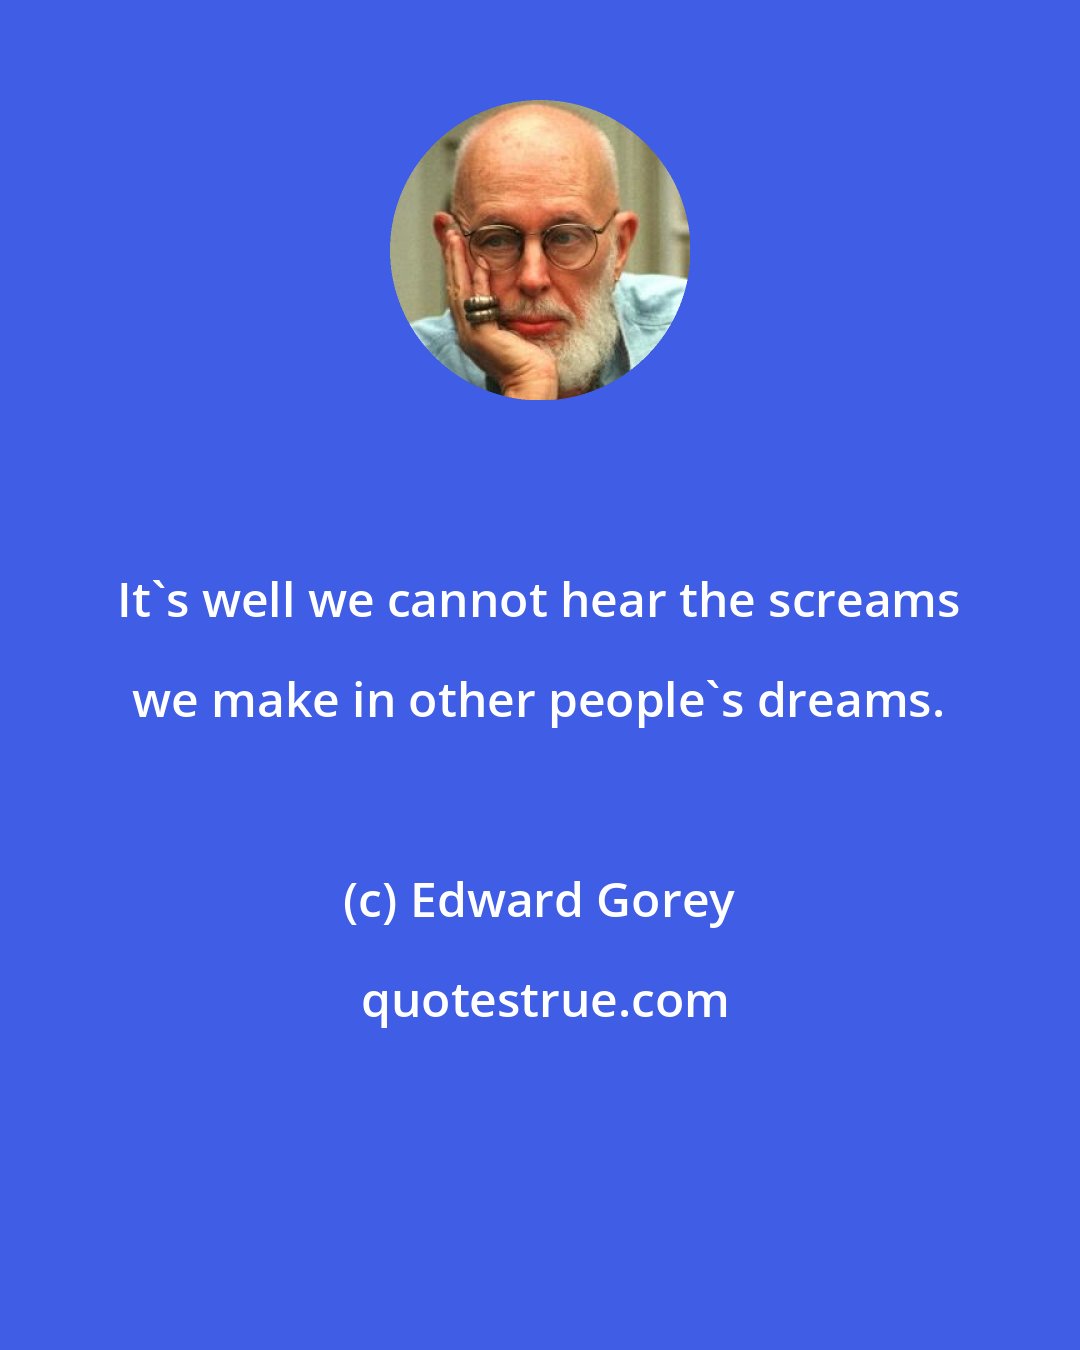 Edward Gorey: It's well we cannot hear the screams we make in other people's dreams.